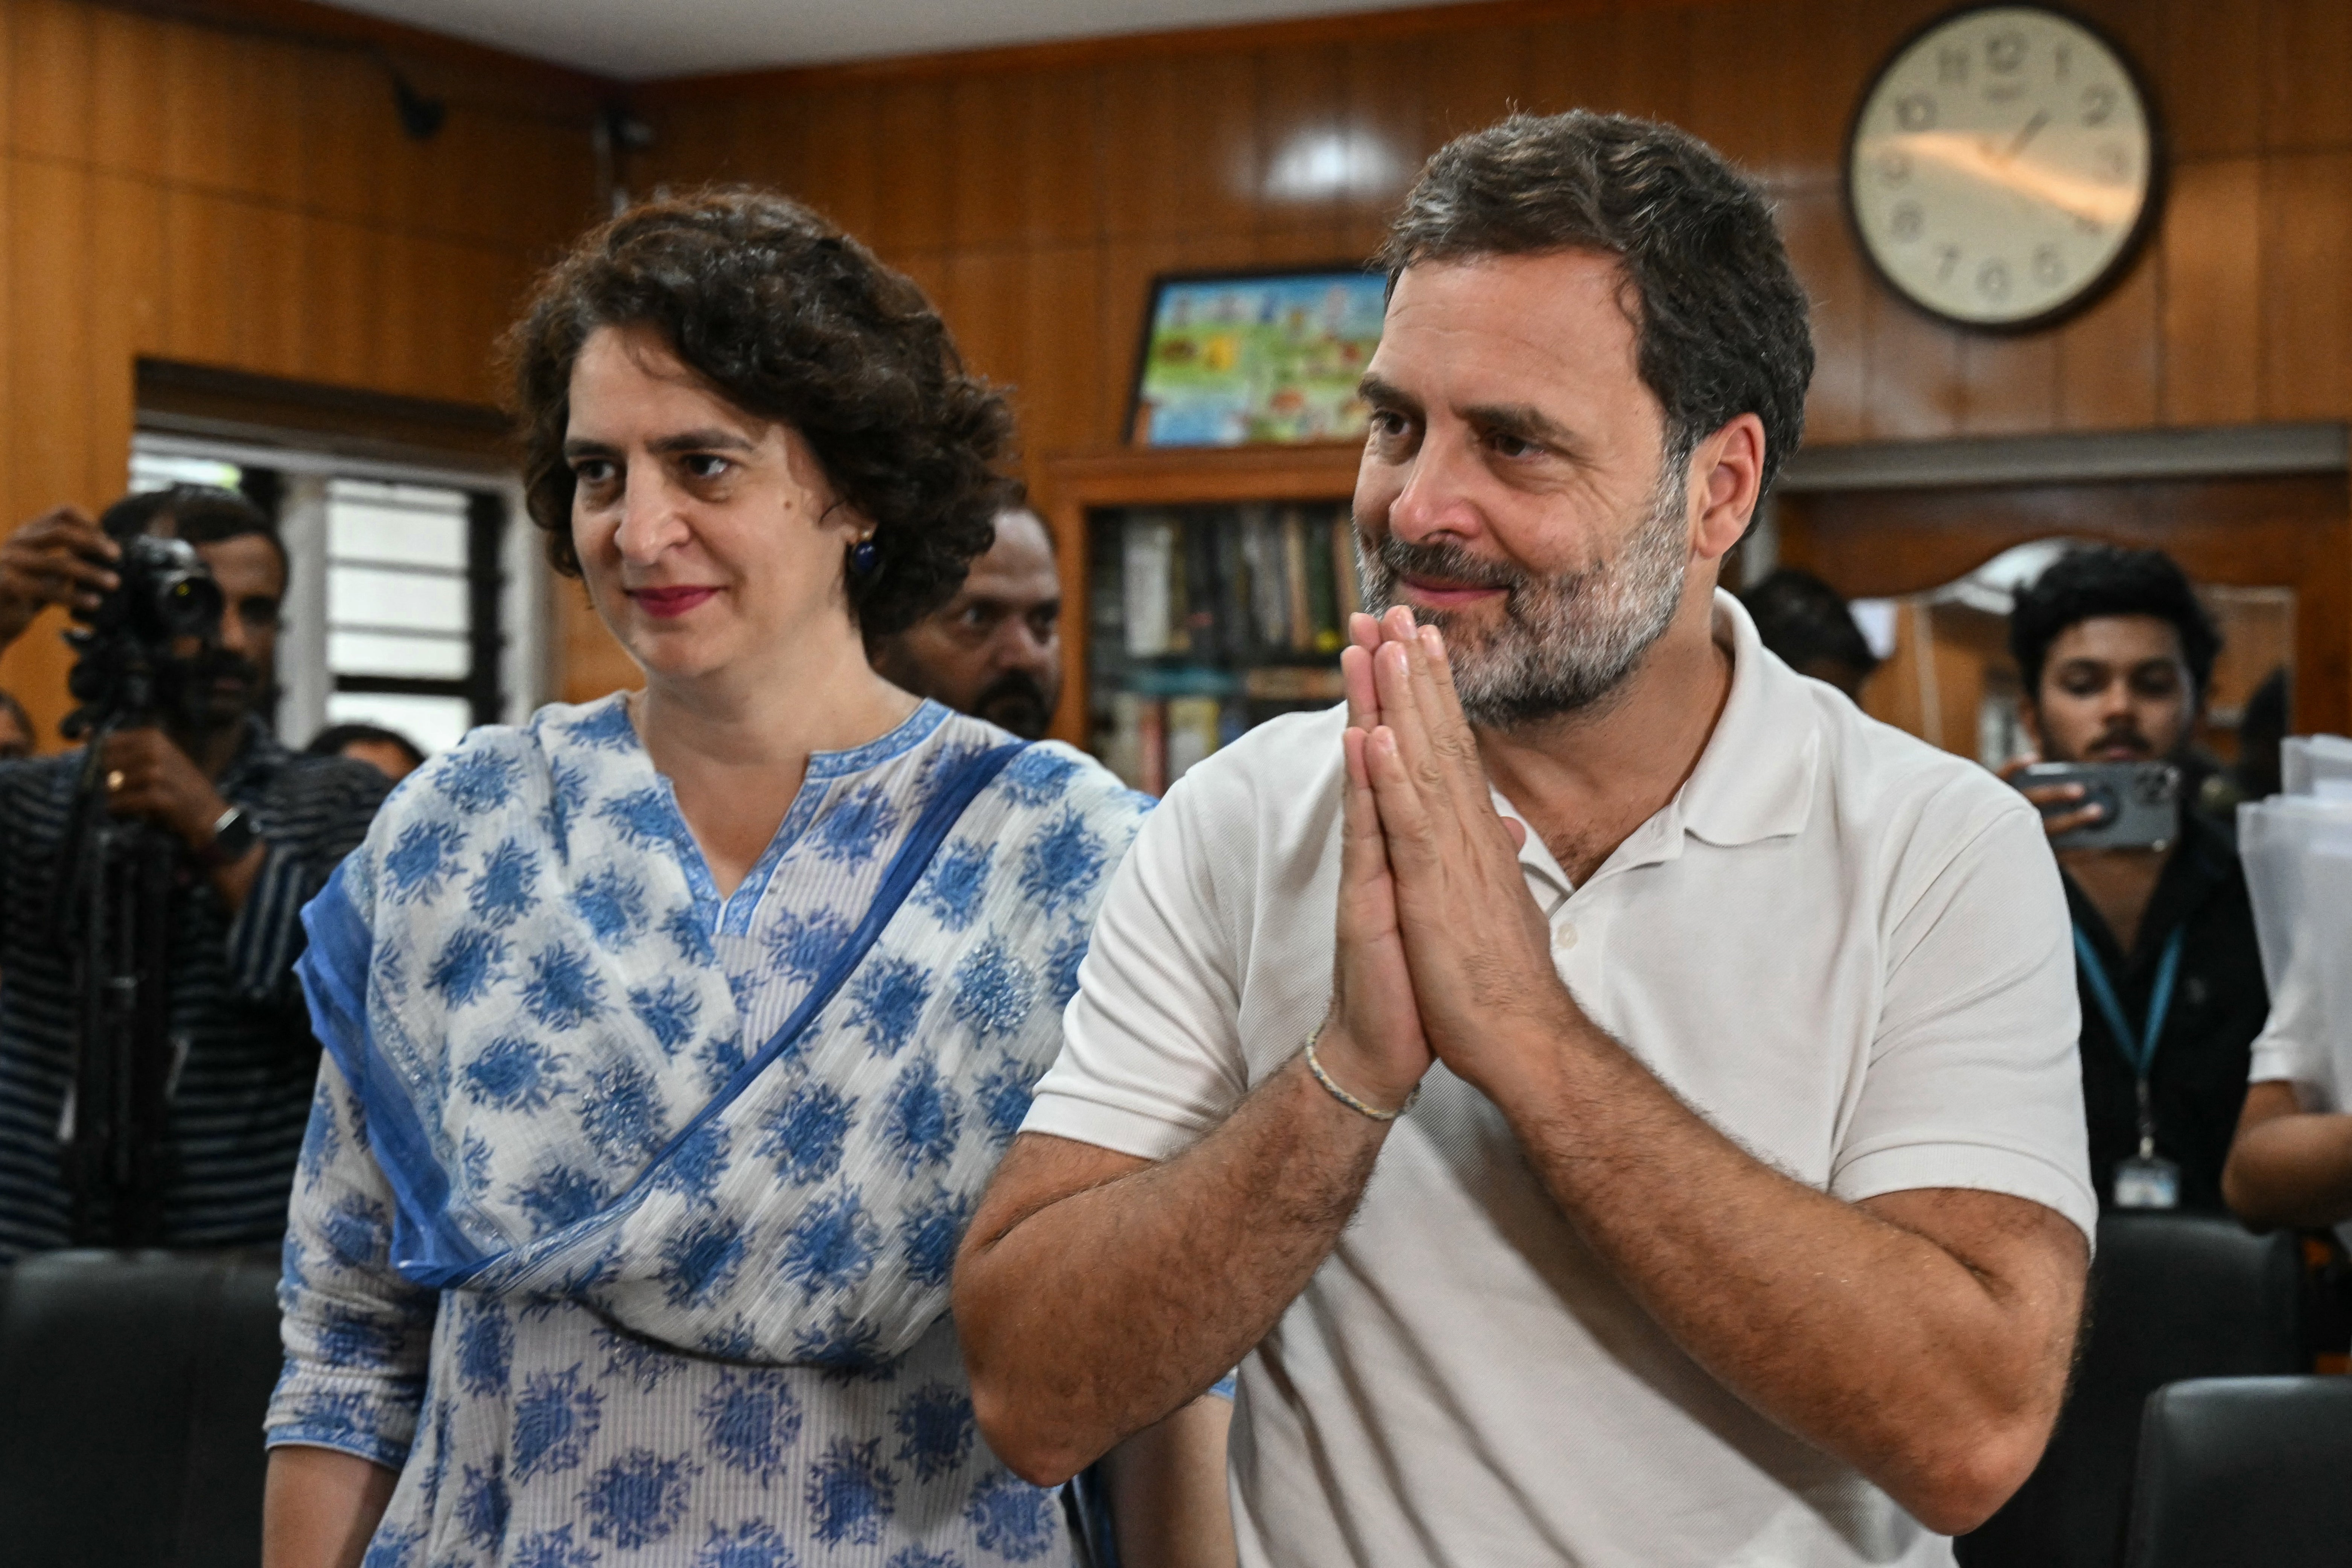 Rahul Gandhi and his sister Priyanka Gandhi Vadra arrive to file his nomination papers for India's general elections